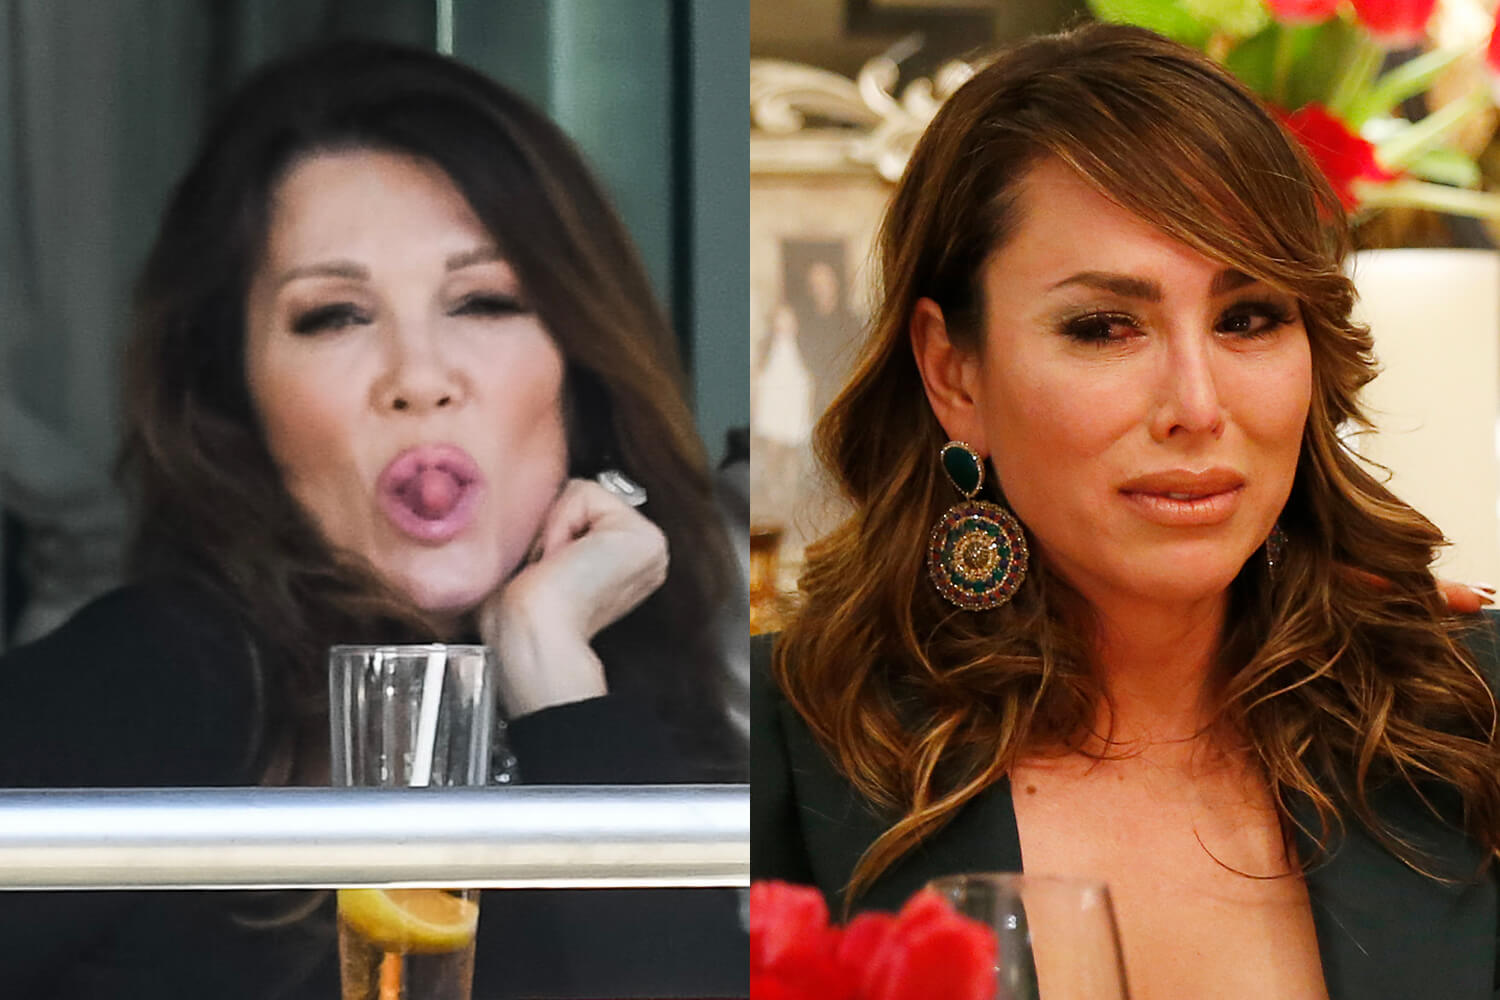 Kelly Dodd Claps Back At Lisa Vanderpump’s Dine & Dash Accusations: ‘She’s A Known Liar’